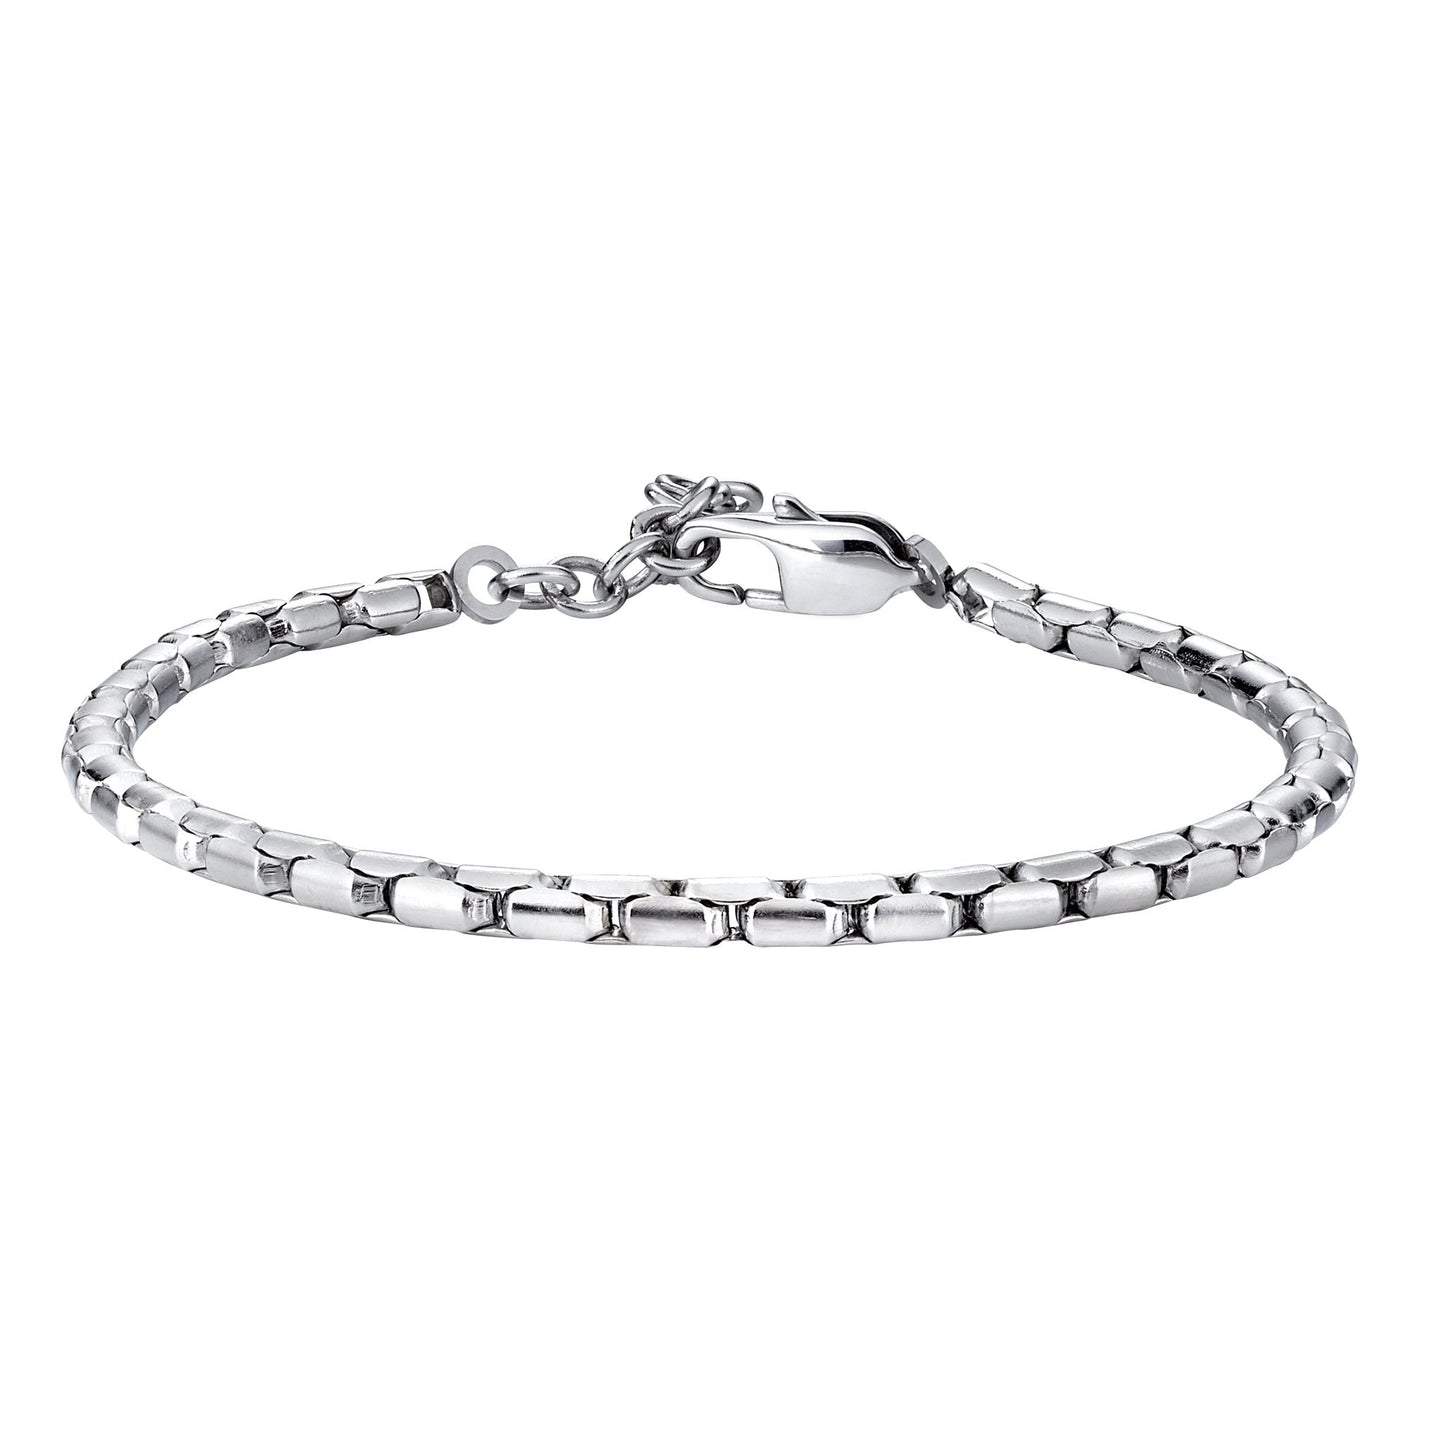 A stainless steel rounded box link men's bracelet displayed on a neutral white background.